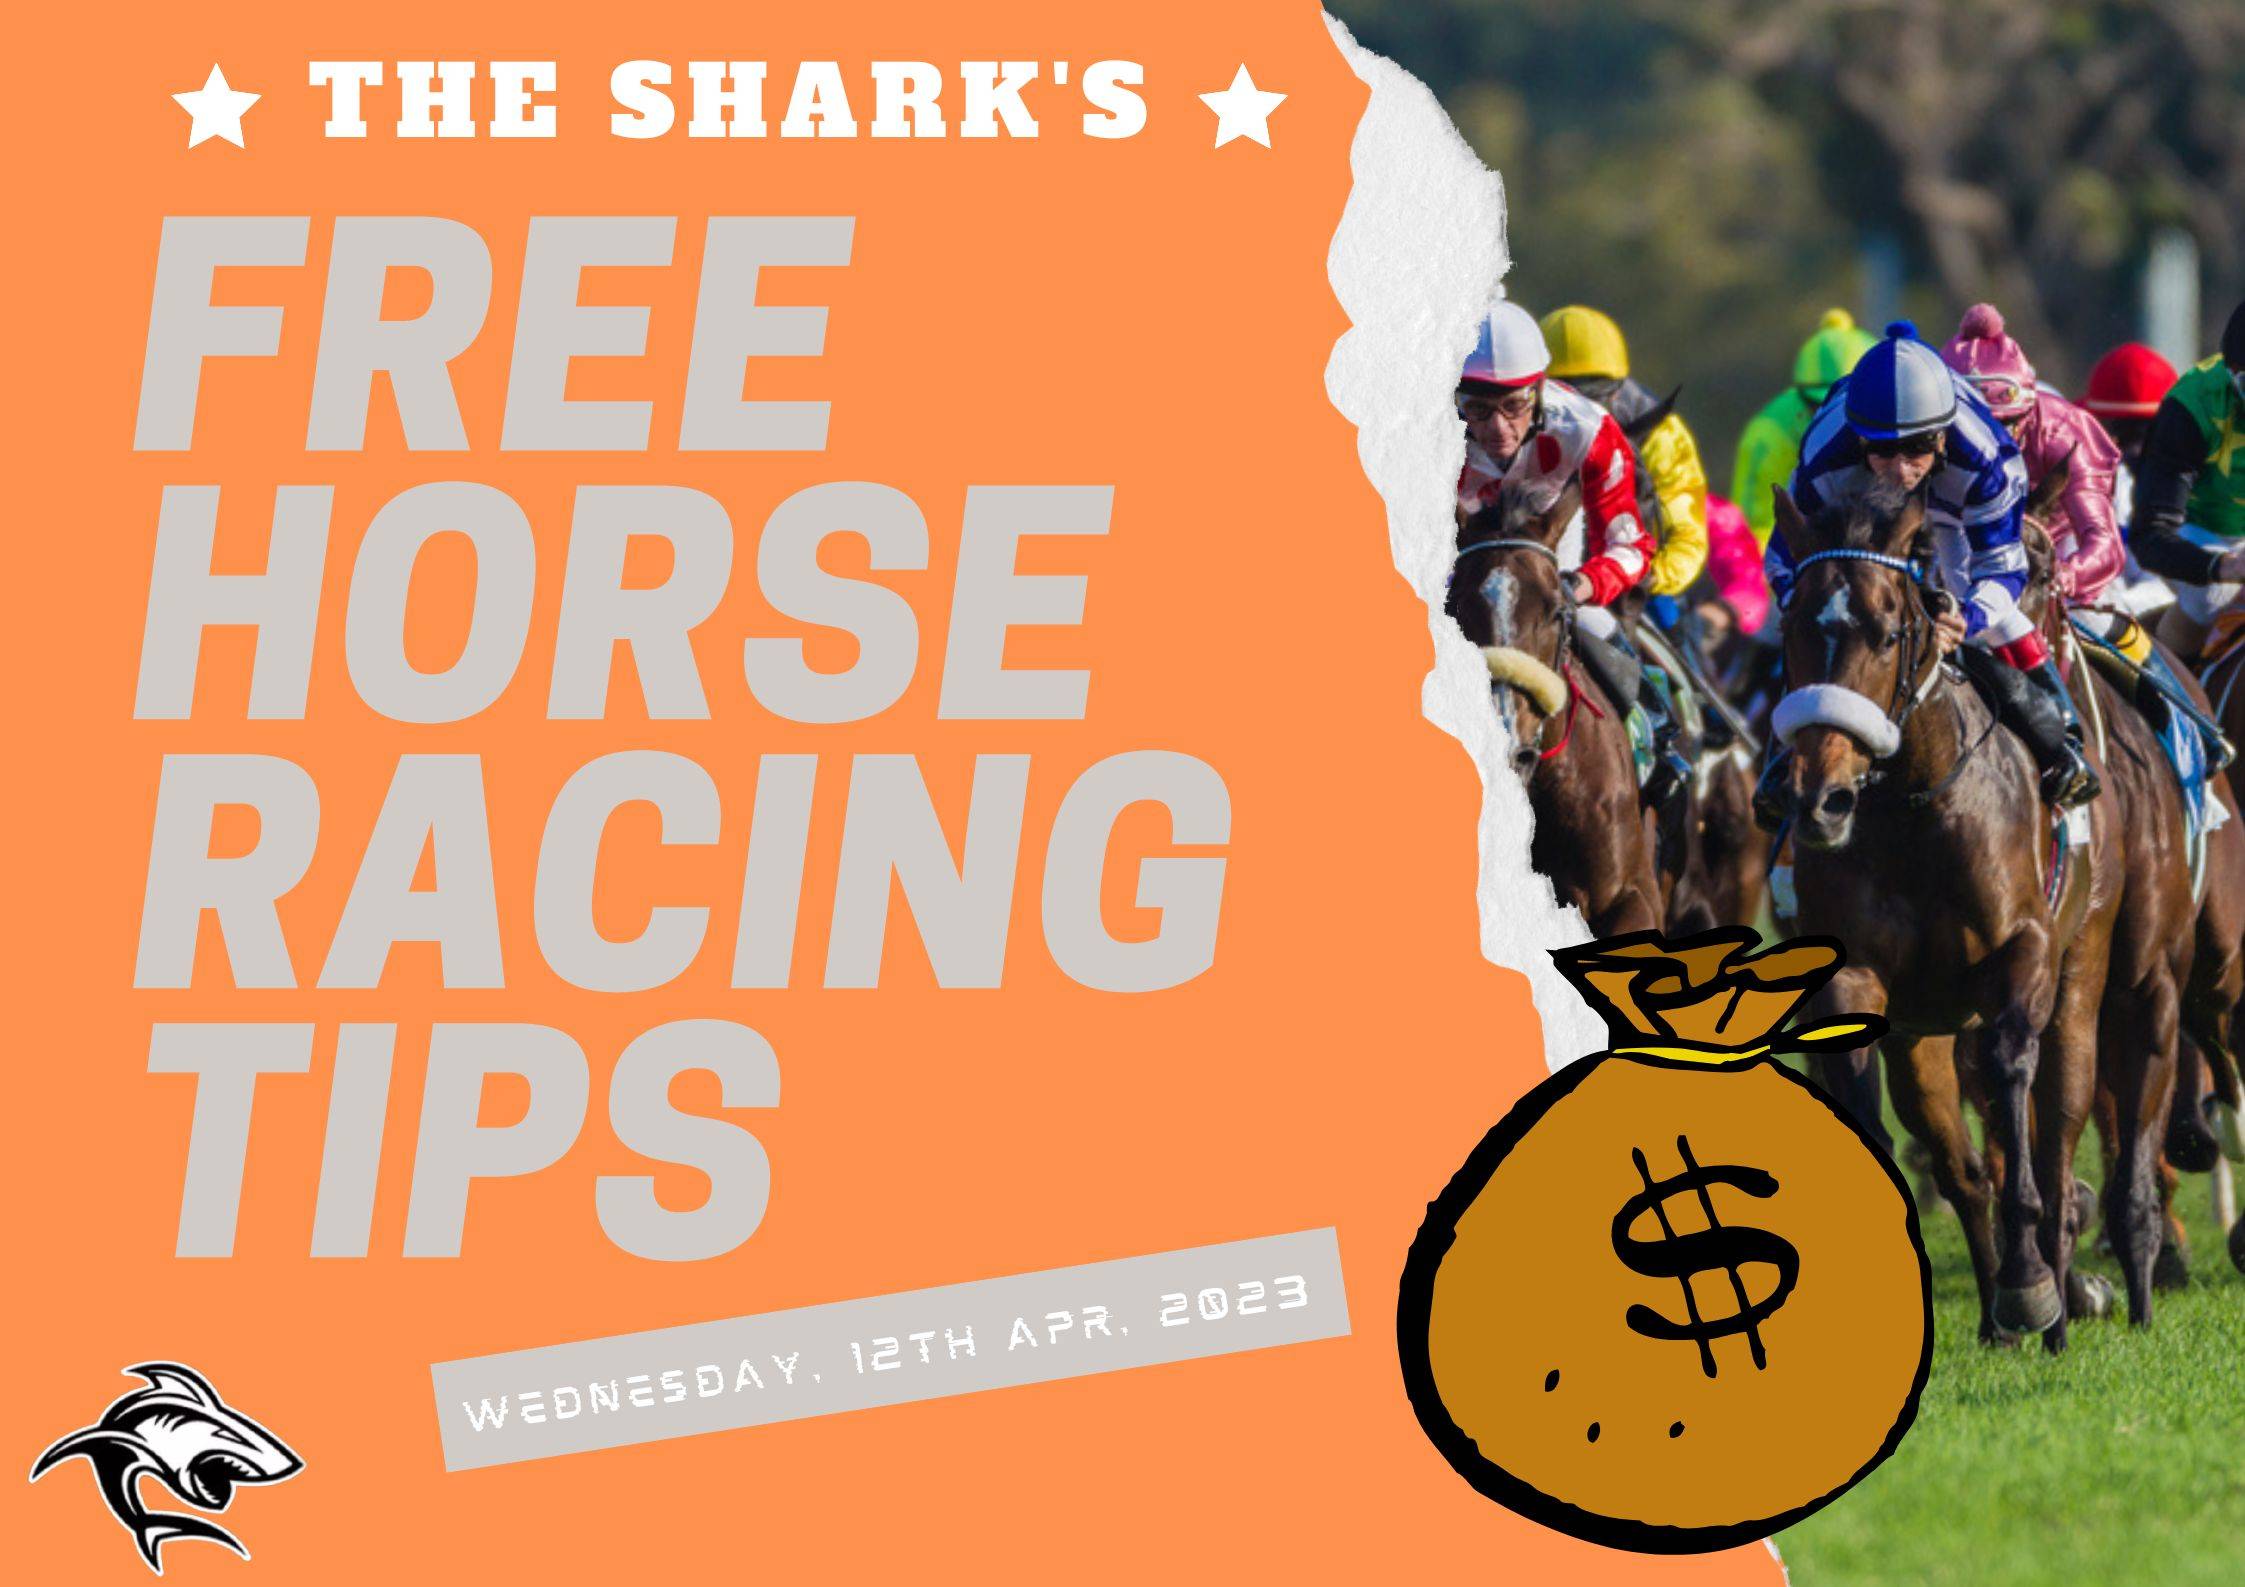 Free Horse Racing Tips - 12th Apr